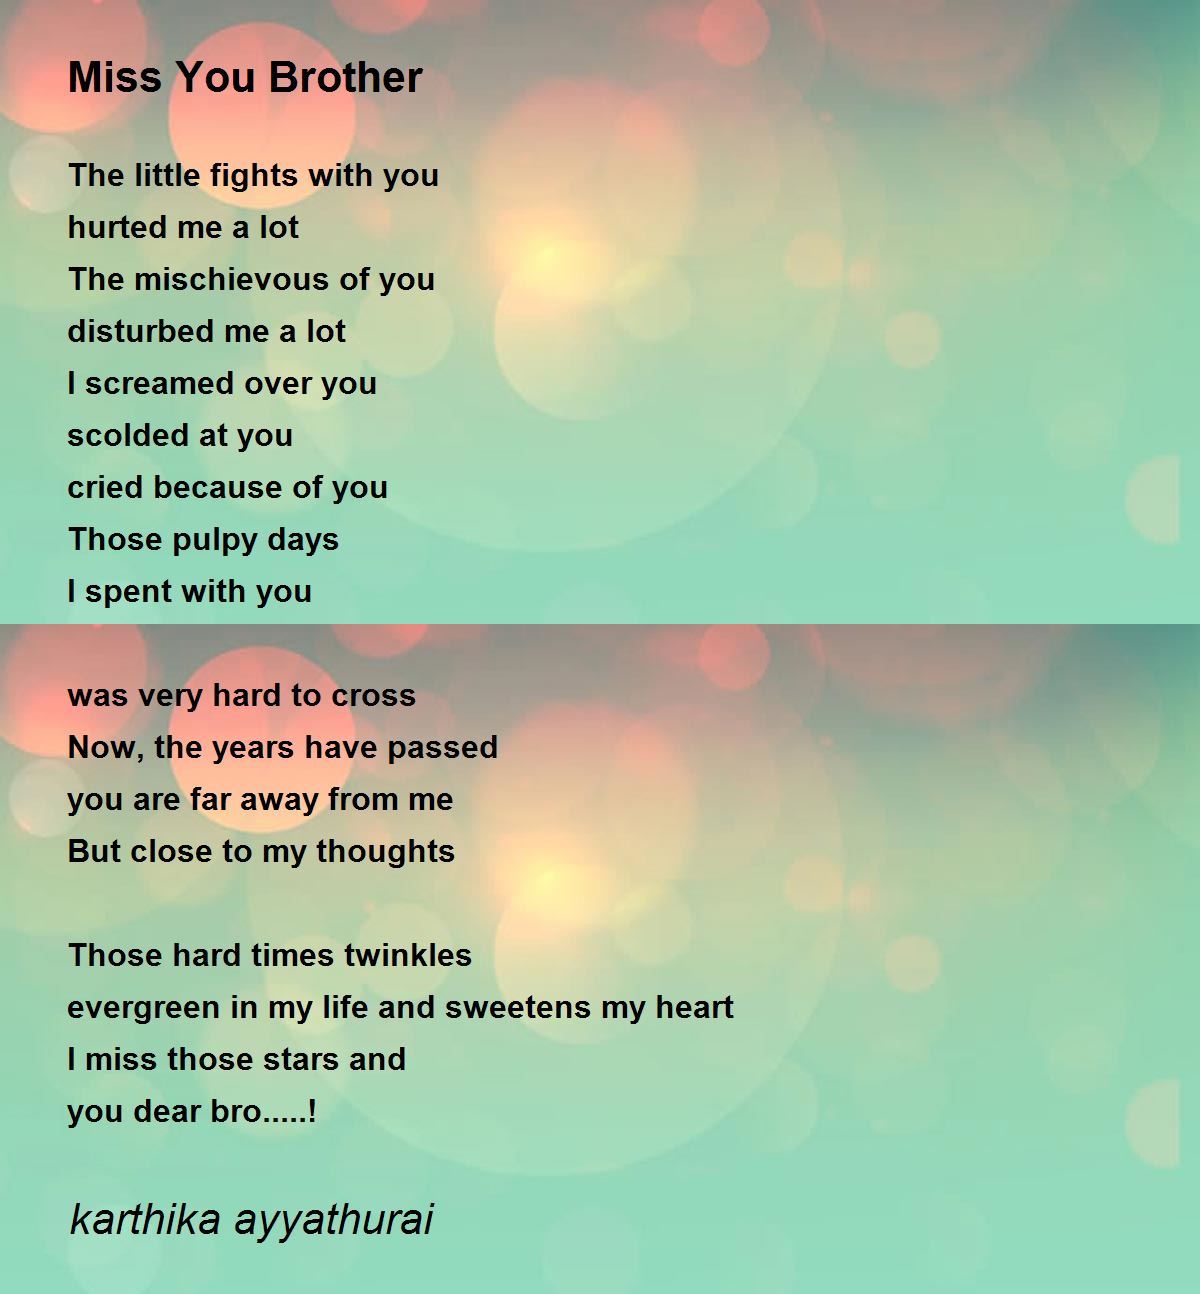 Miss You Brother - Miss You Brother Poem by karthika ayyathurai